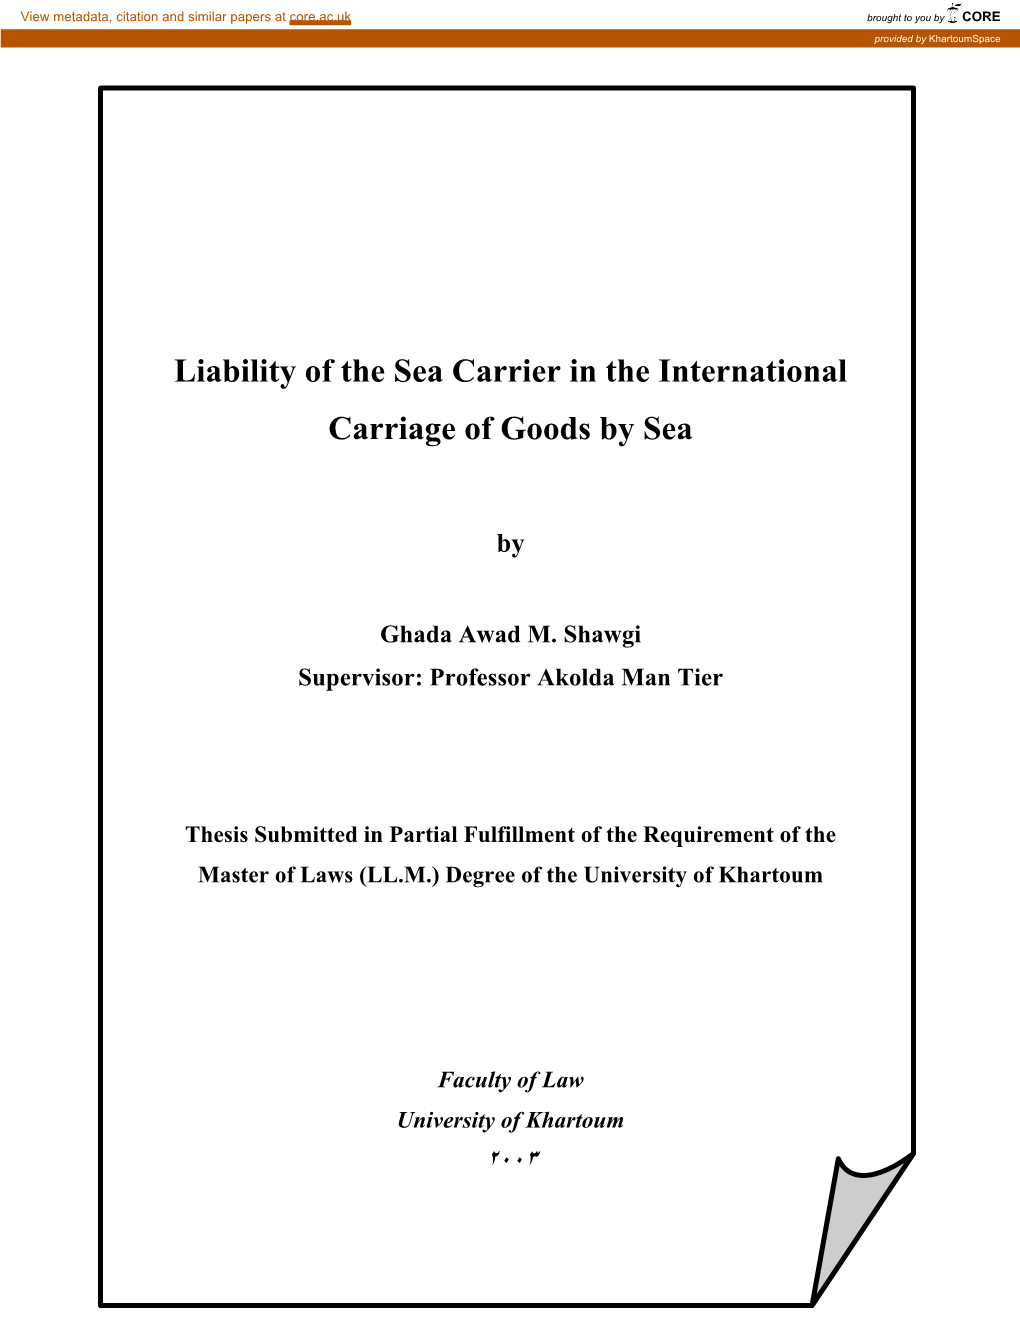 Liability of the Sea Carrier in the International Carriage of Goods by Sea